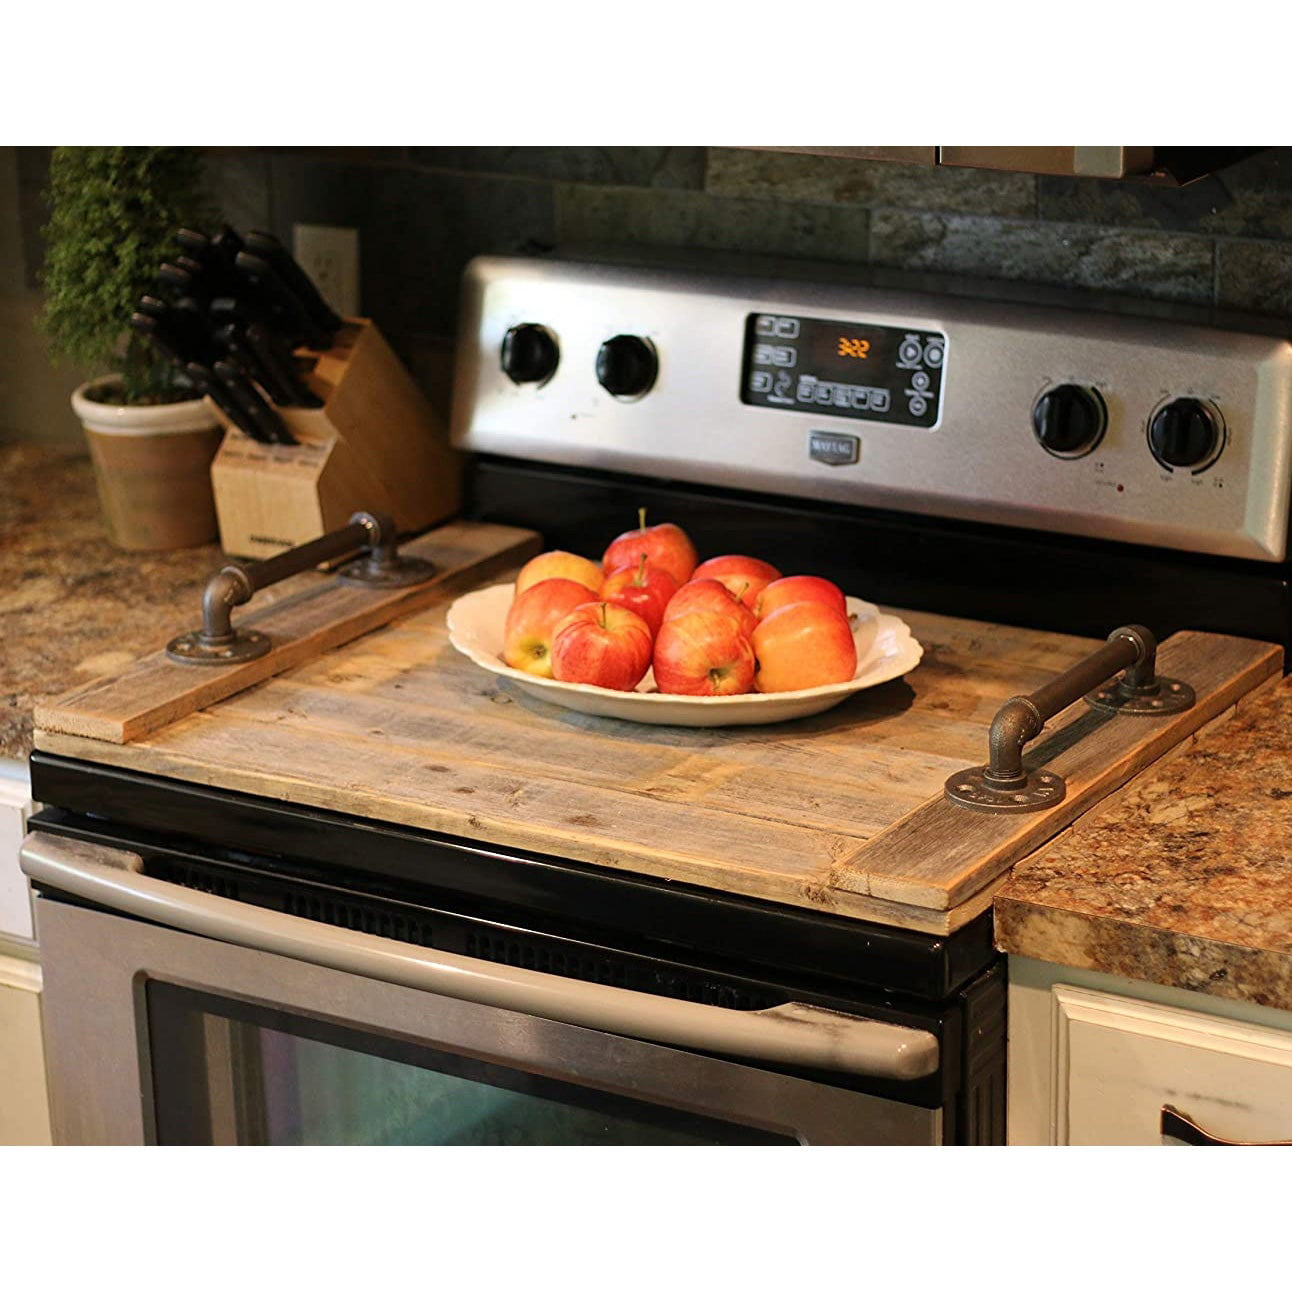 GASHELL Noodle Board Stove Cover, Wood Stove Top Cover with